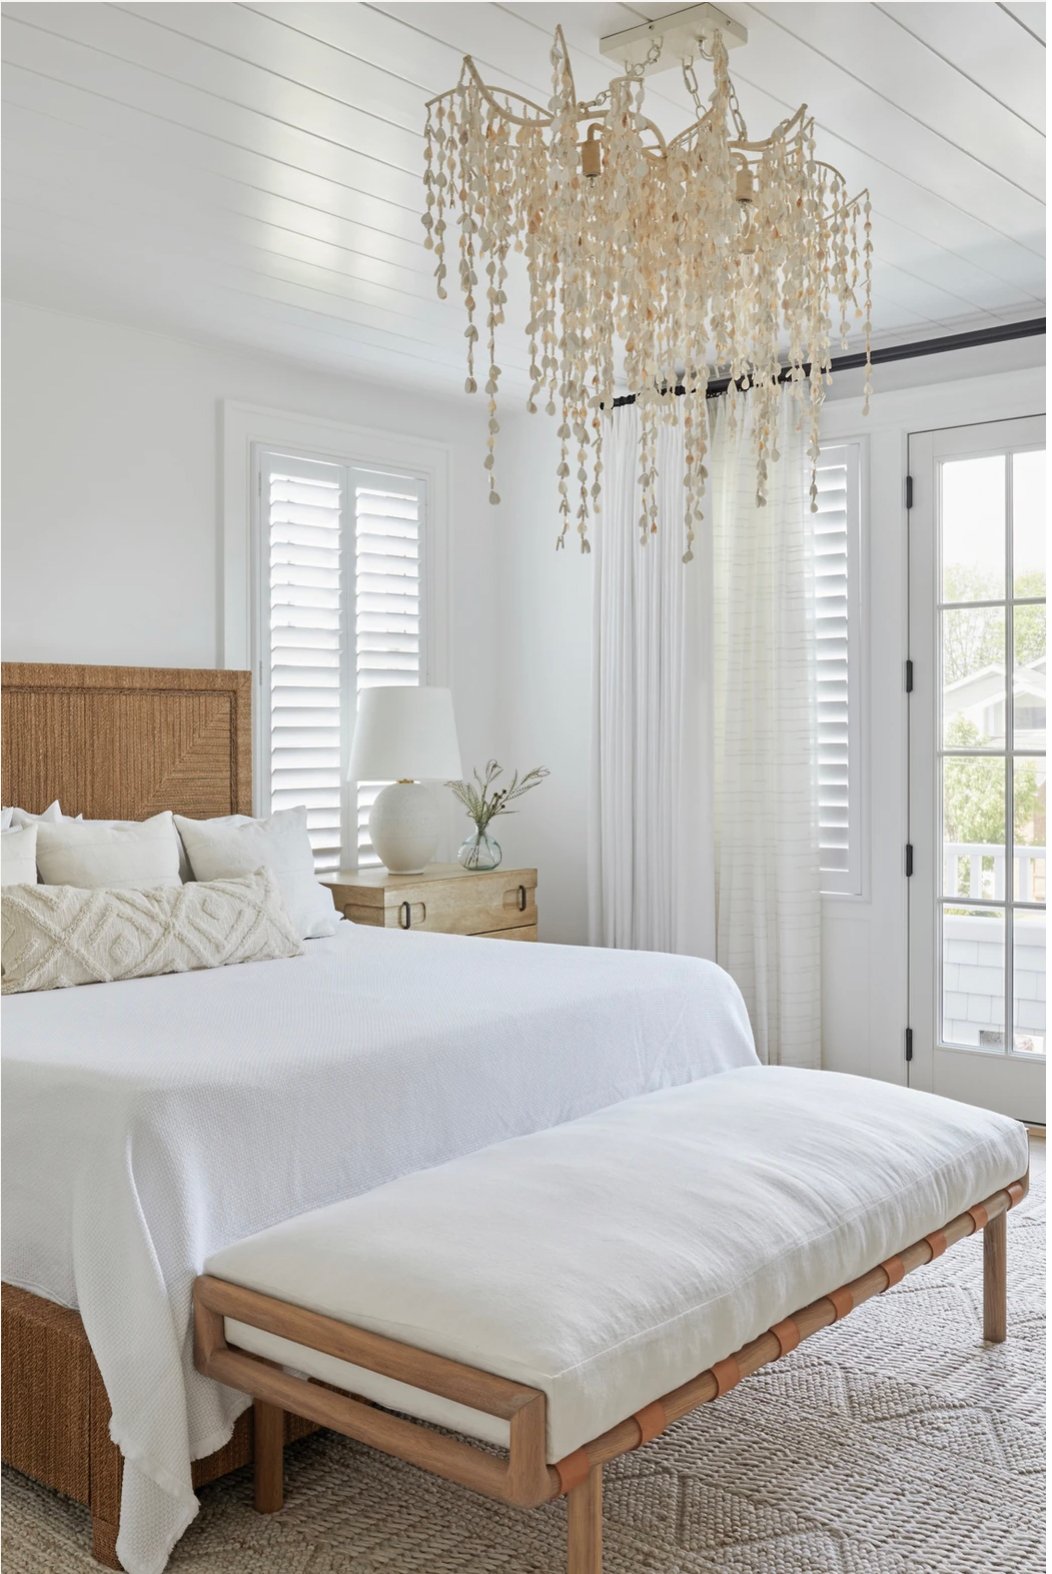 bedroom with white walls, woven bedframe and a dramatic chandelier.